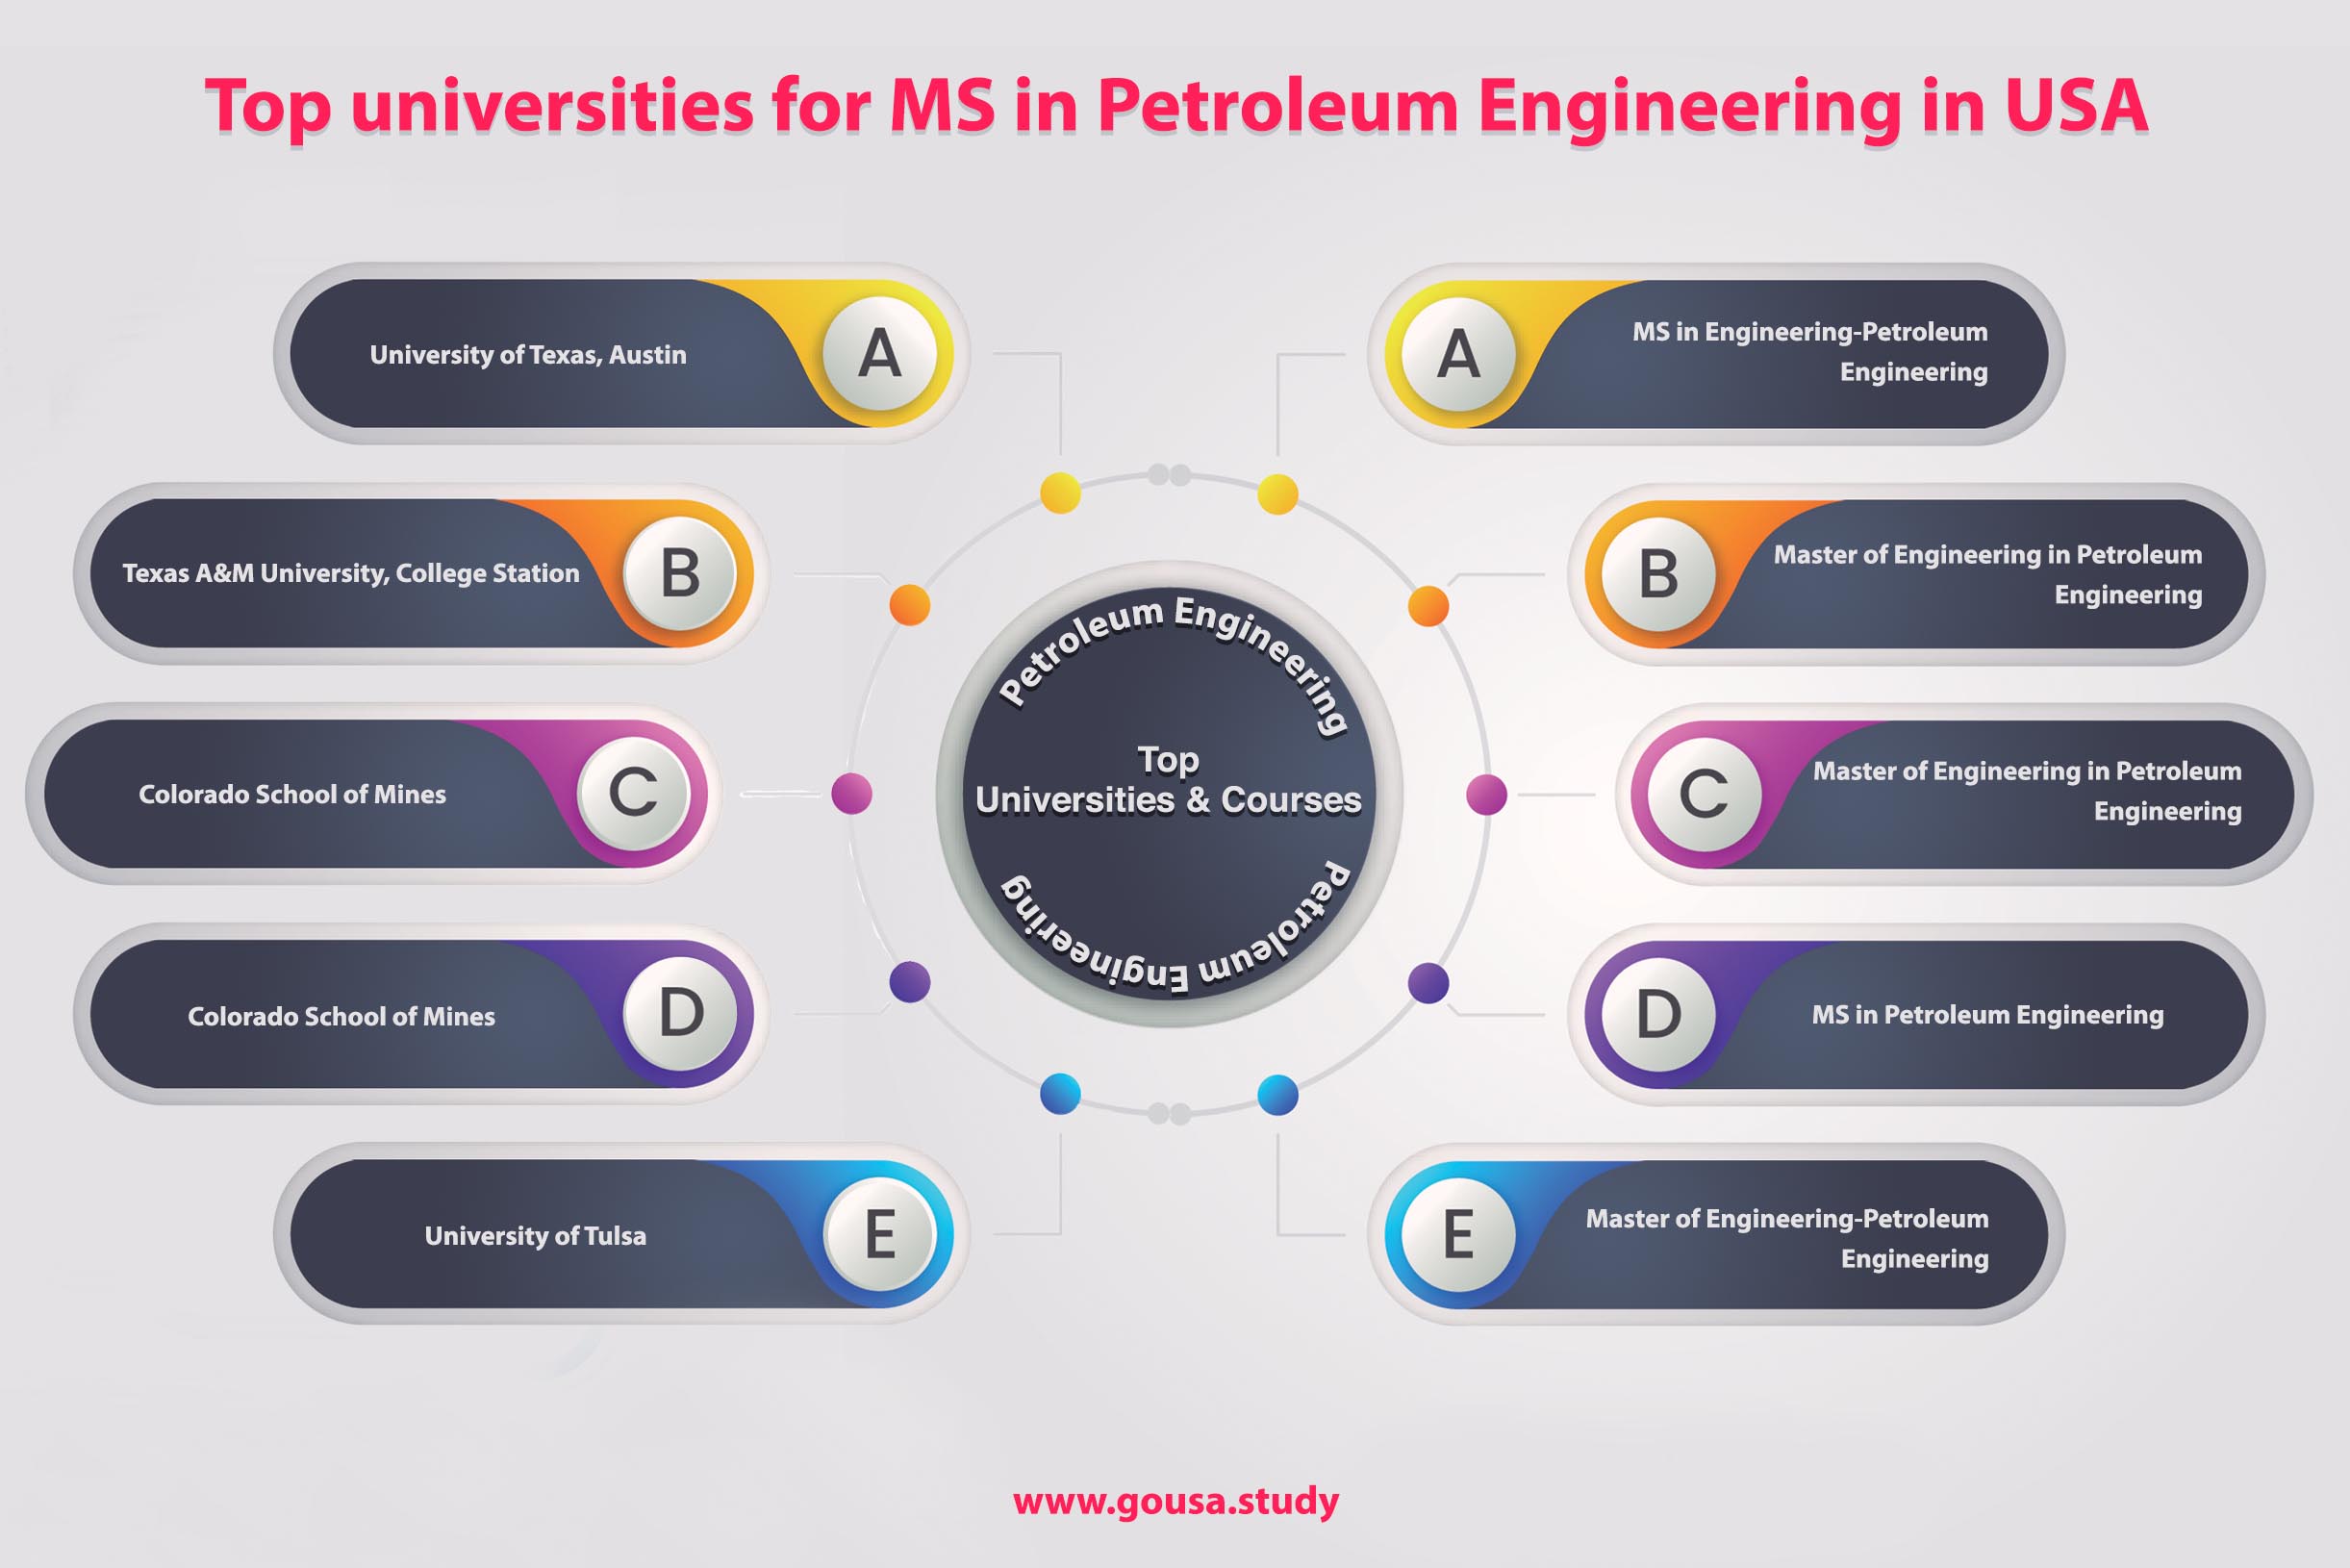 Top Universities for MS in Petroleum Engineering USA